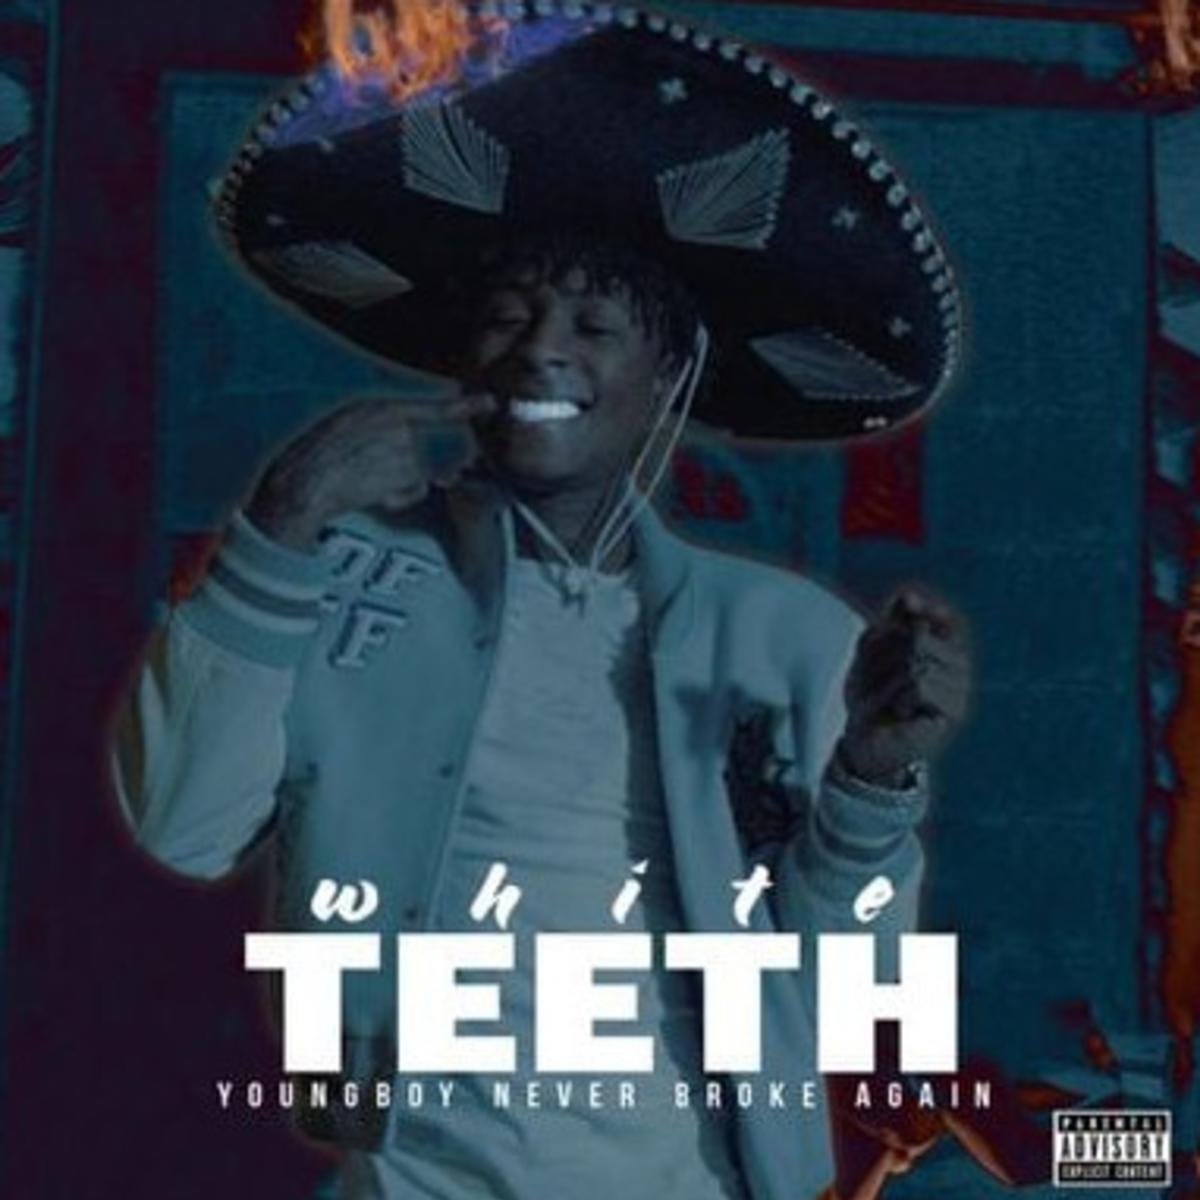 NBA YoungBoy Shows Off His “White Teeth” In New Single